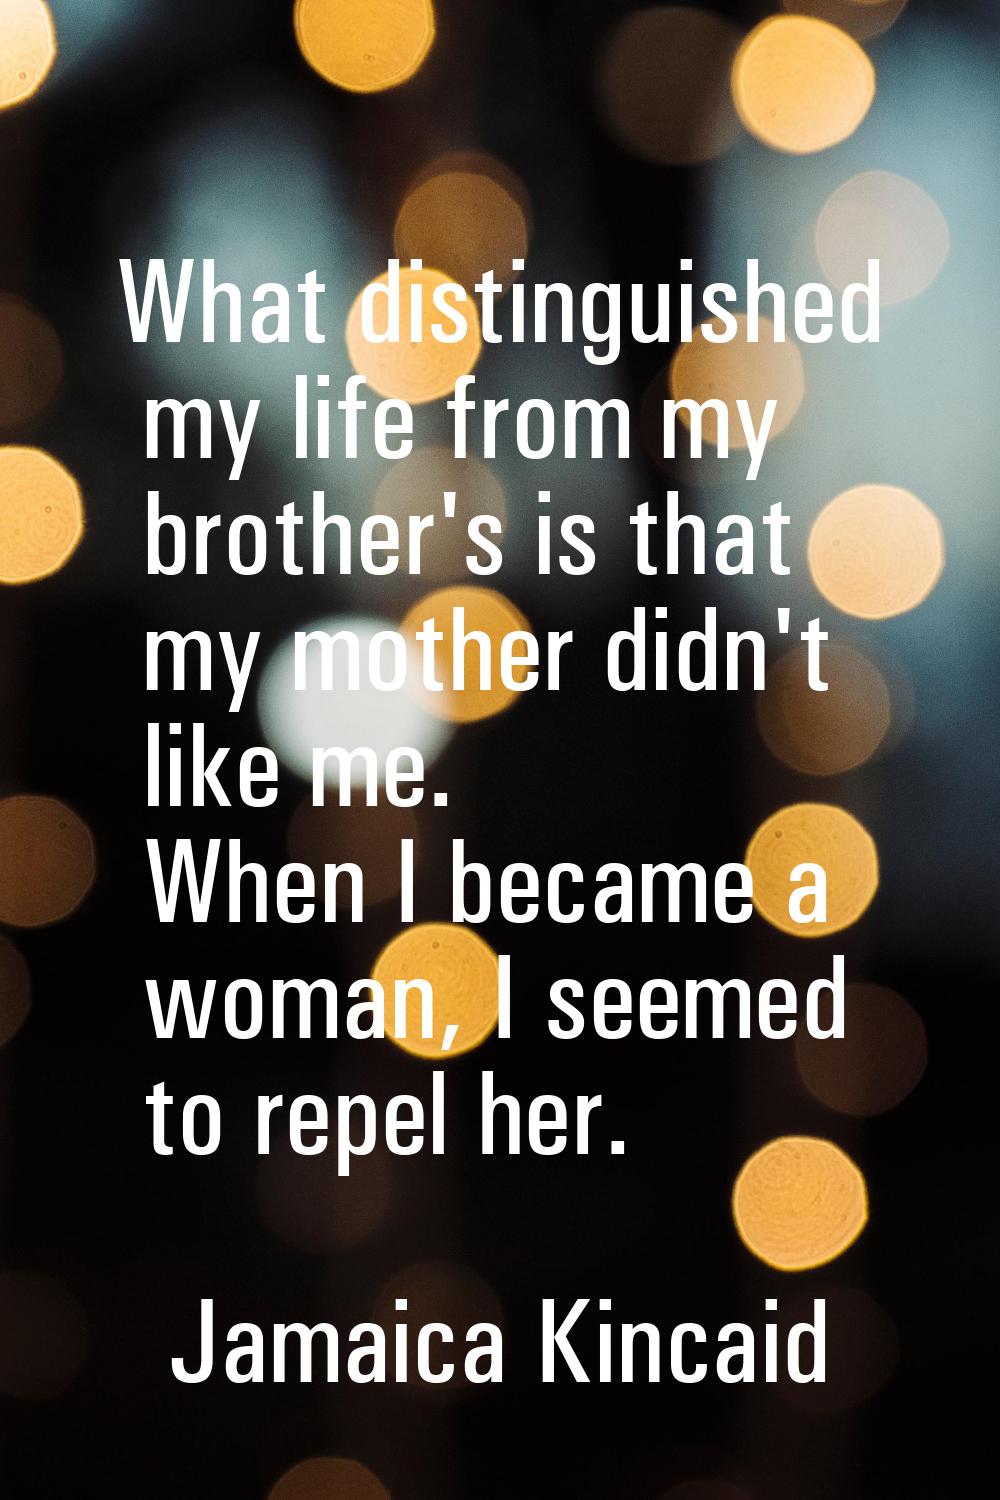 What distinguished my life from my brother's is that my mother didn't like me. When I became a woma